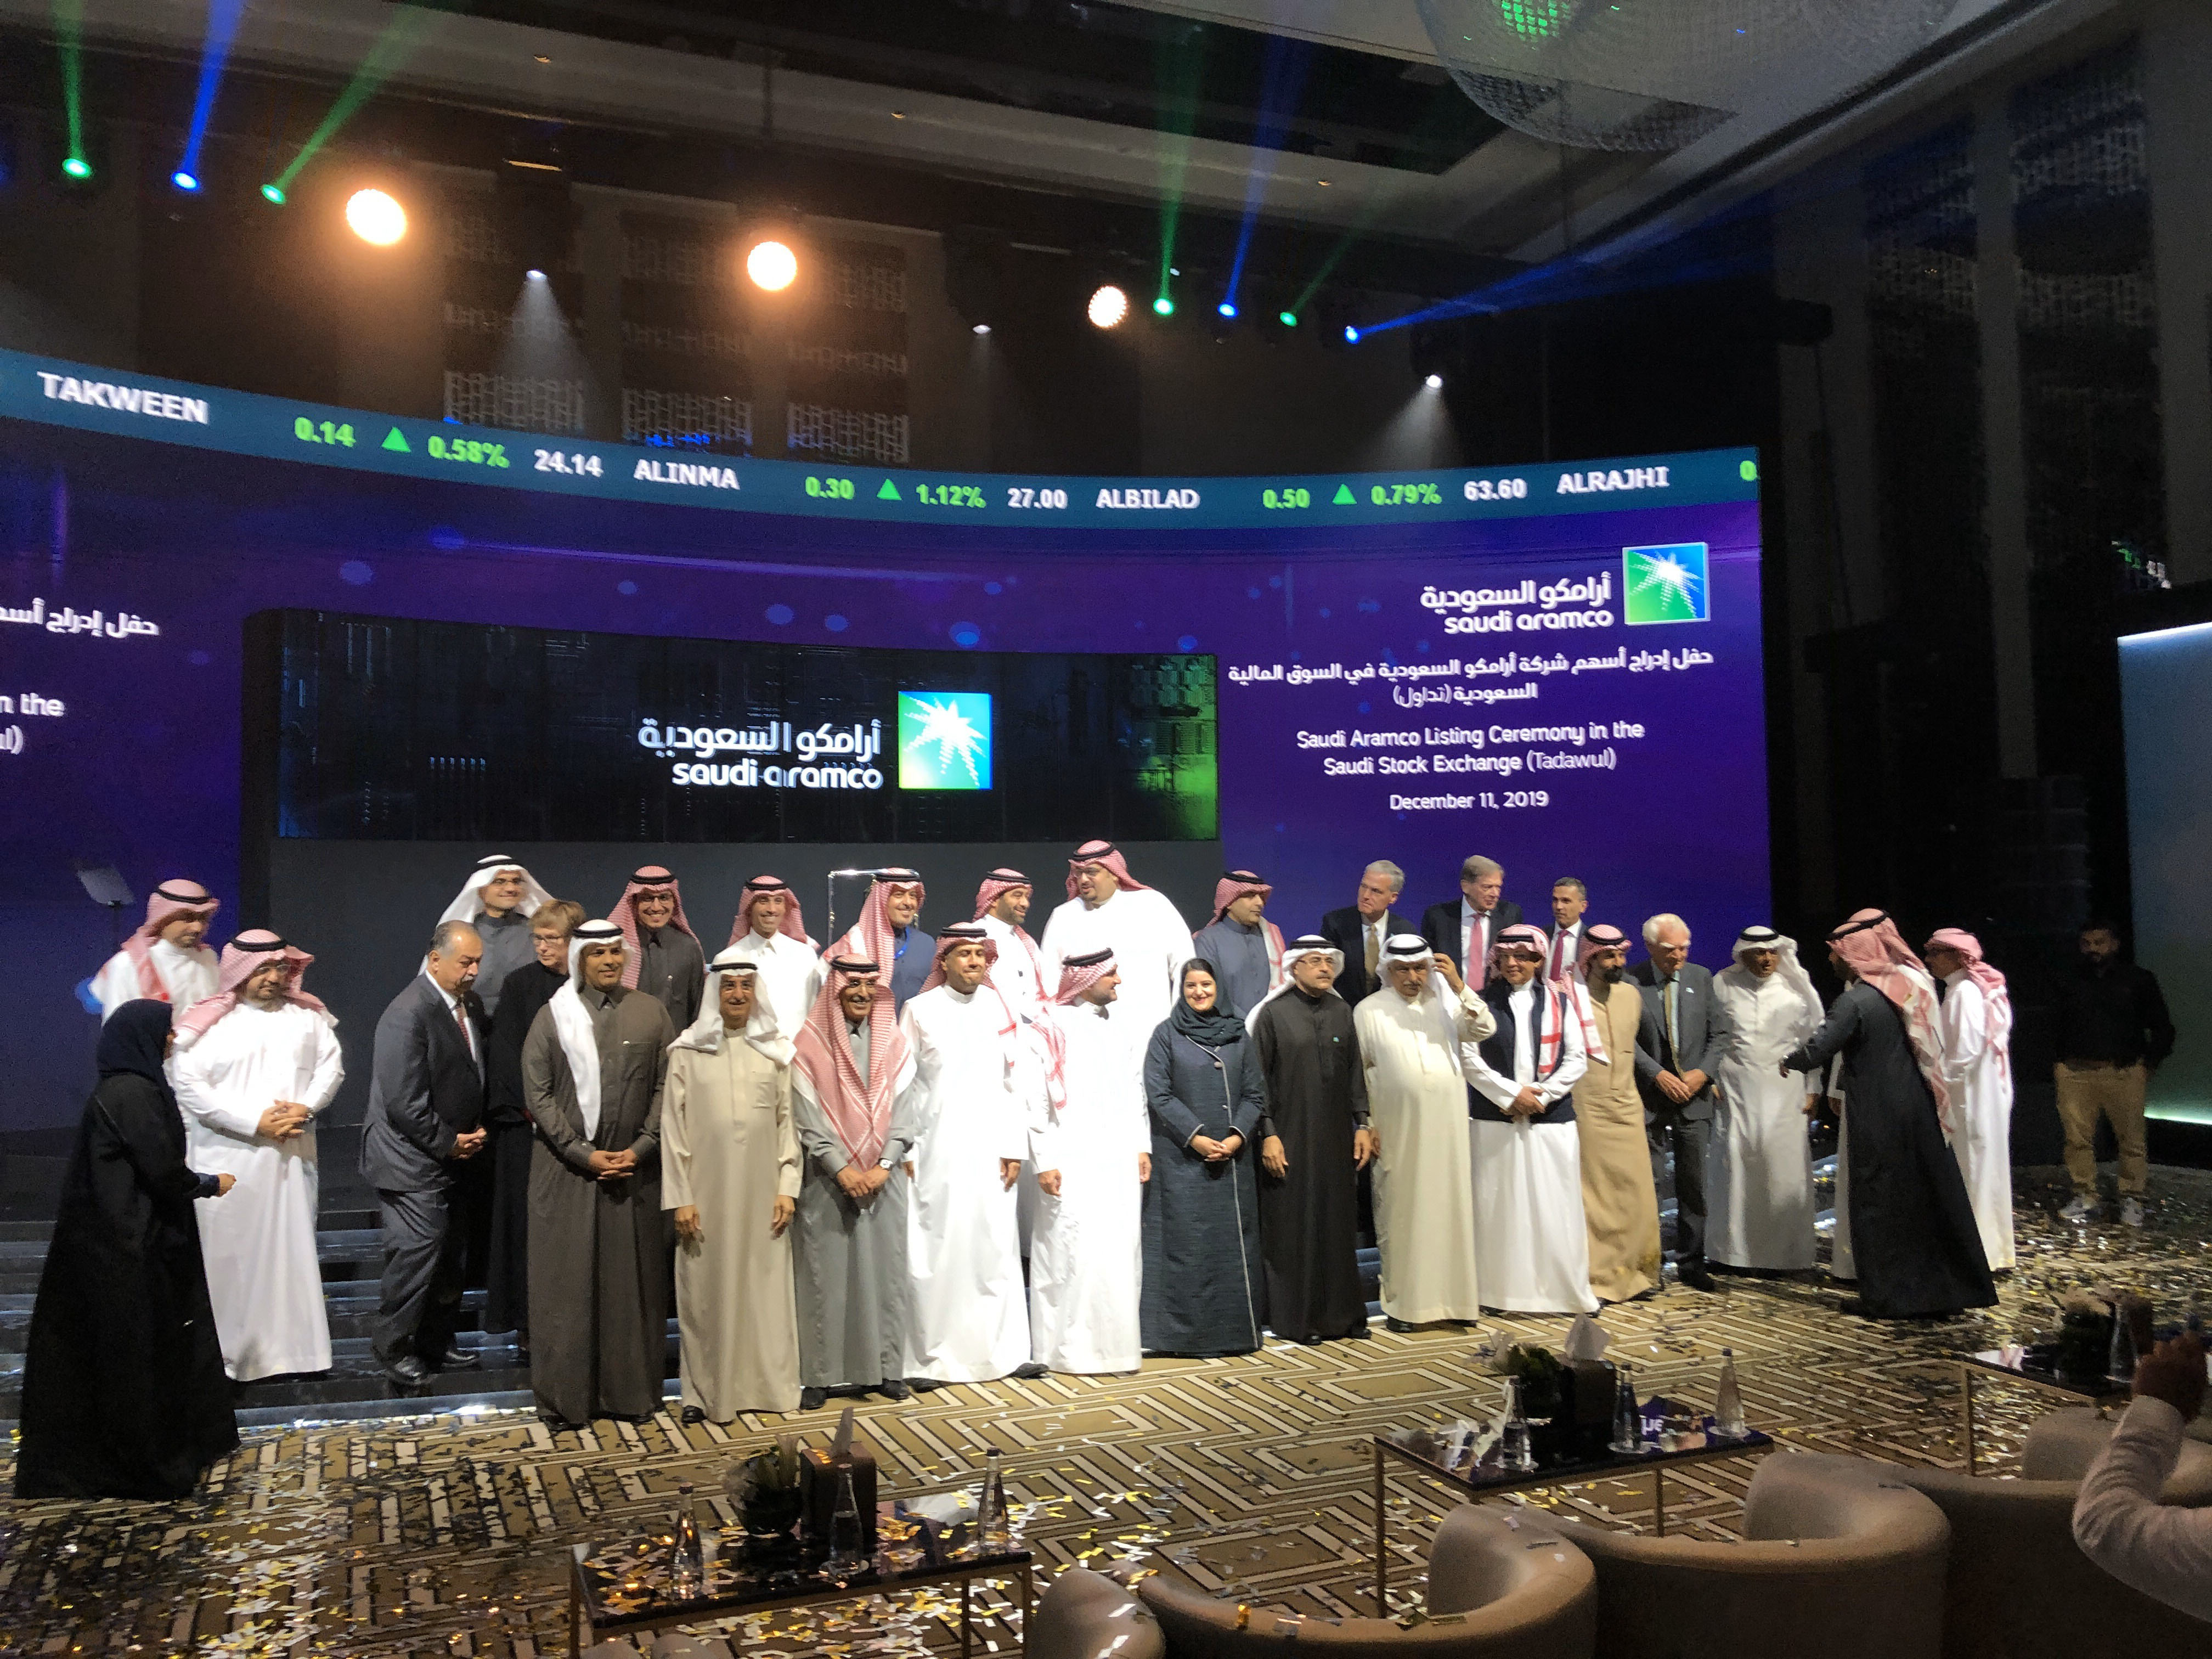 (EDITORS NOTE: Best quality available, image shot using a smartphone.) Participants attend the initial public offering (IPO) of Saudi Aramco at the Fairmont Hotel in Riyadh, Saudi Arabia, on 